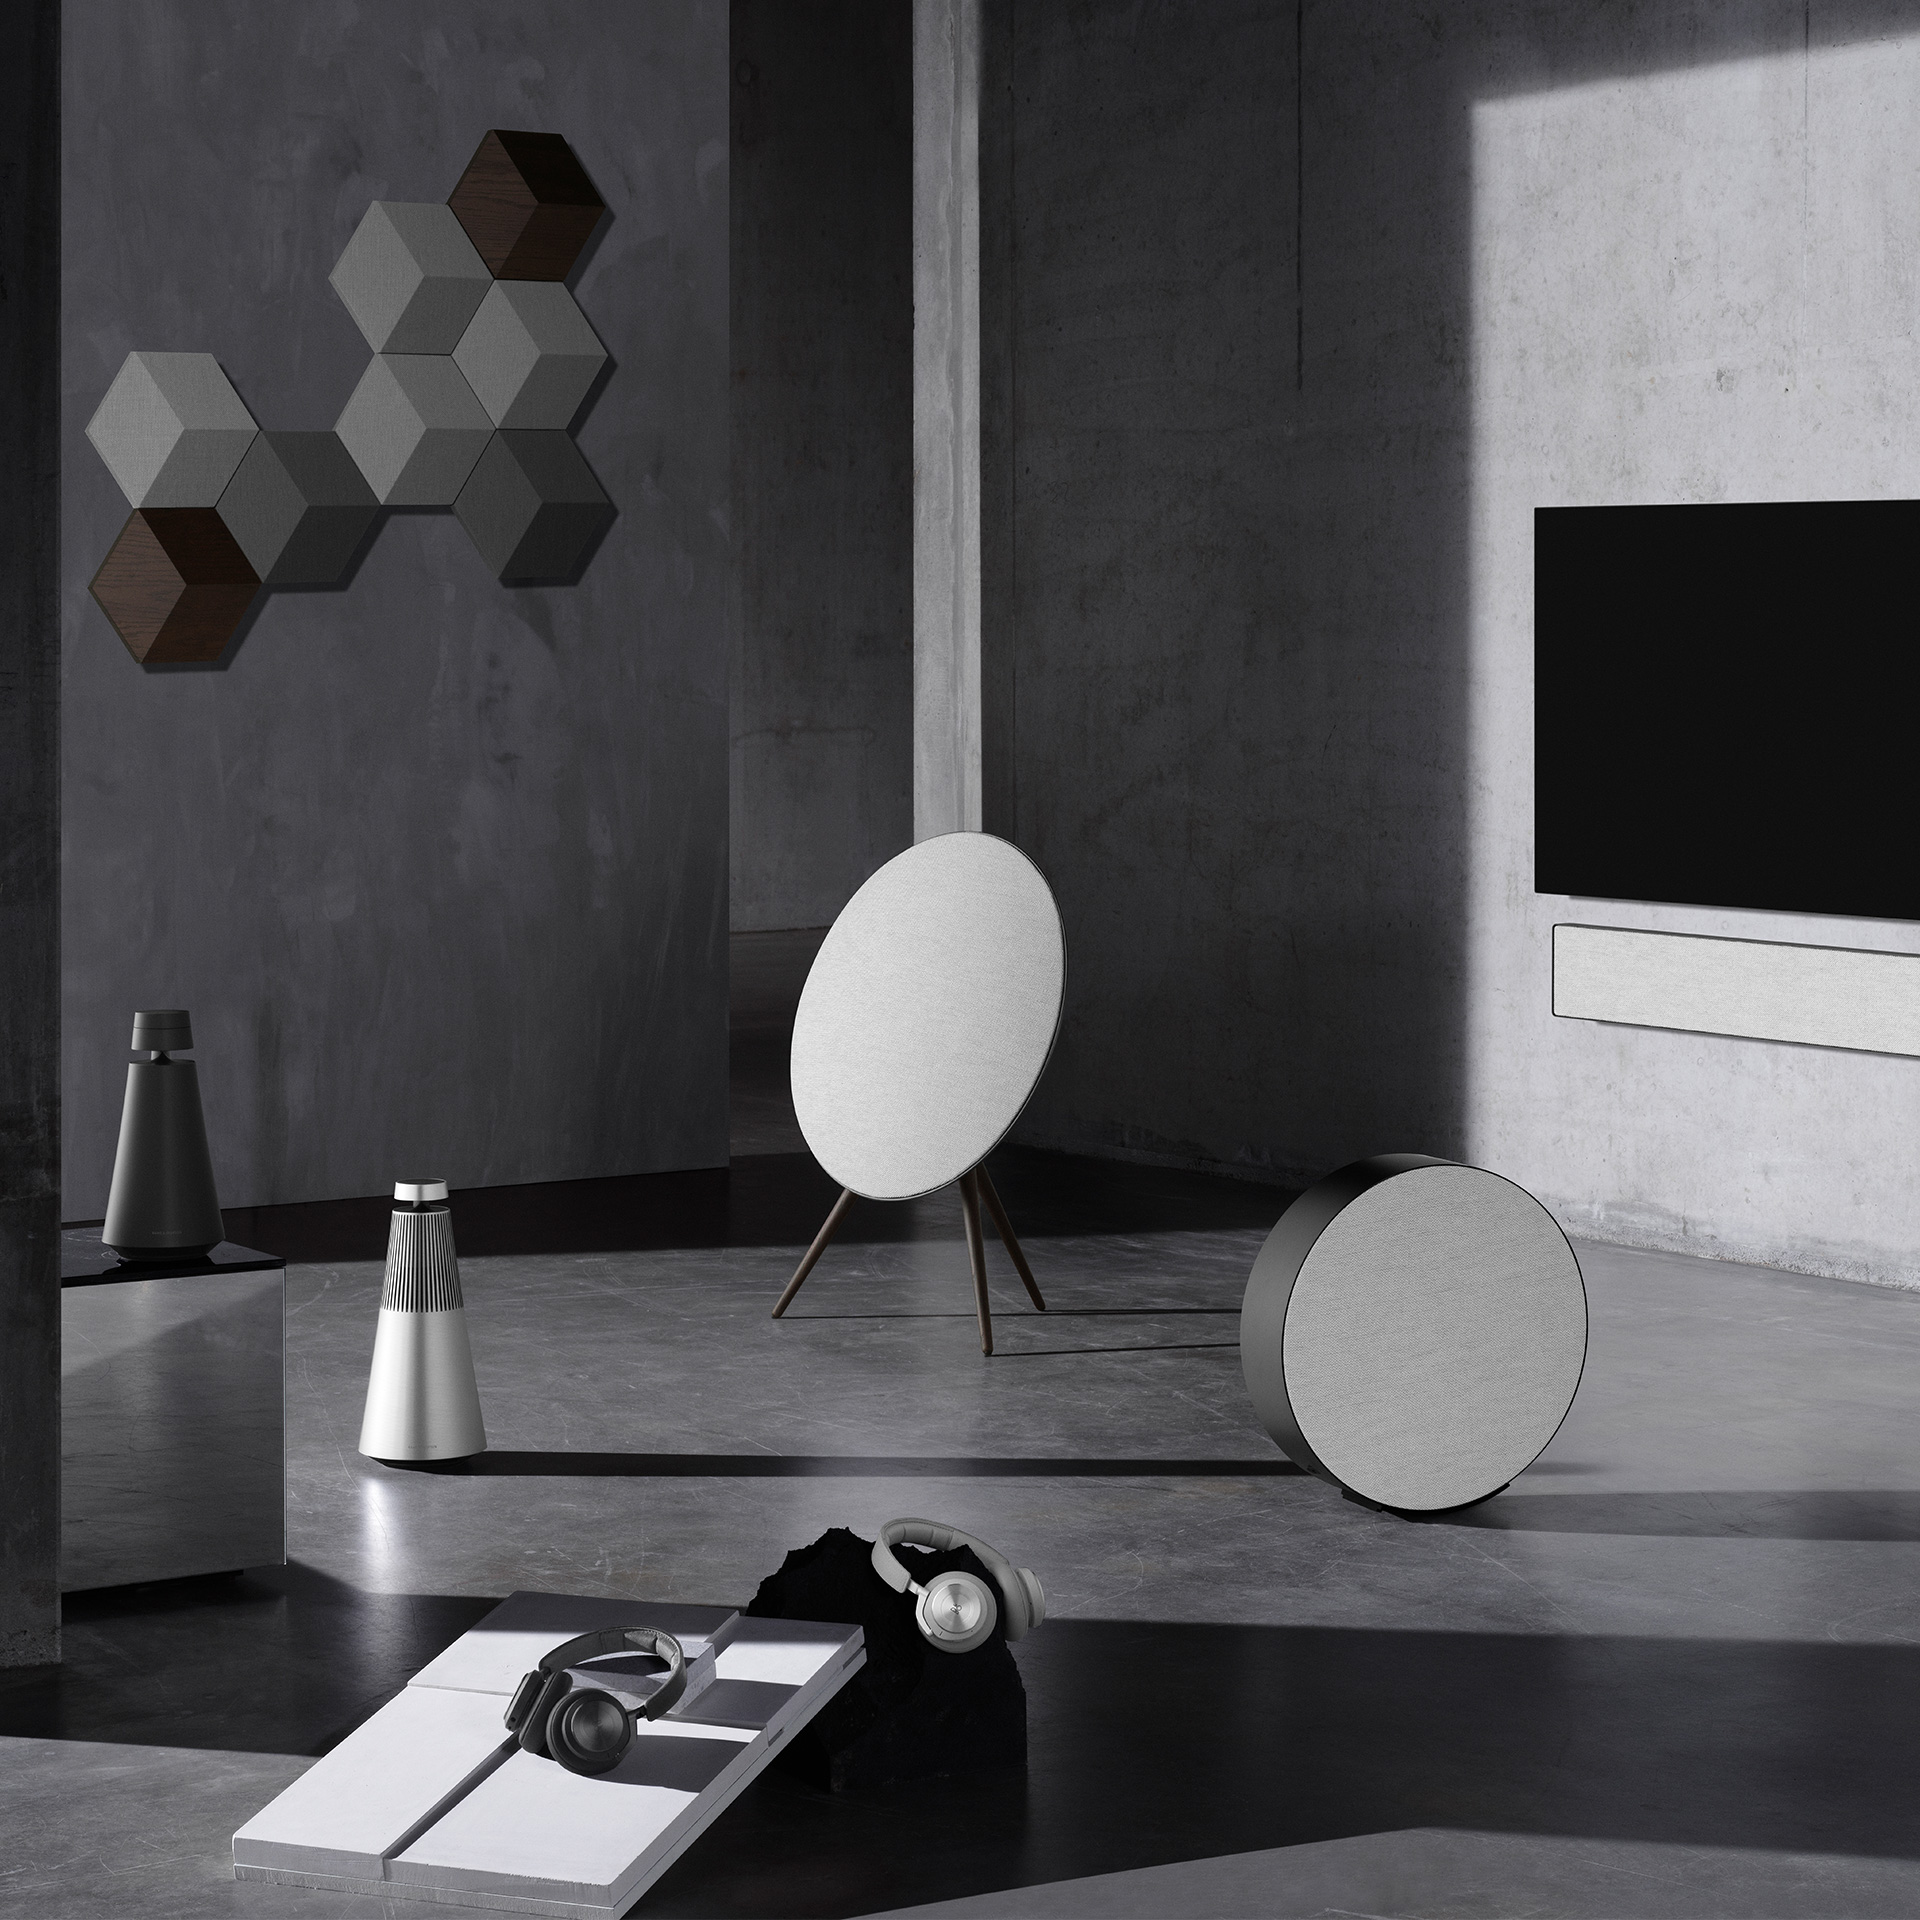 Bang & Olufsen Imagines the Television as Decor